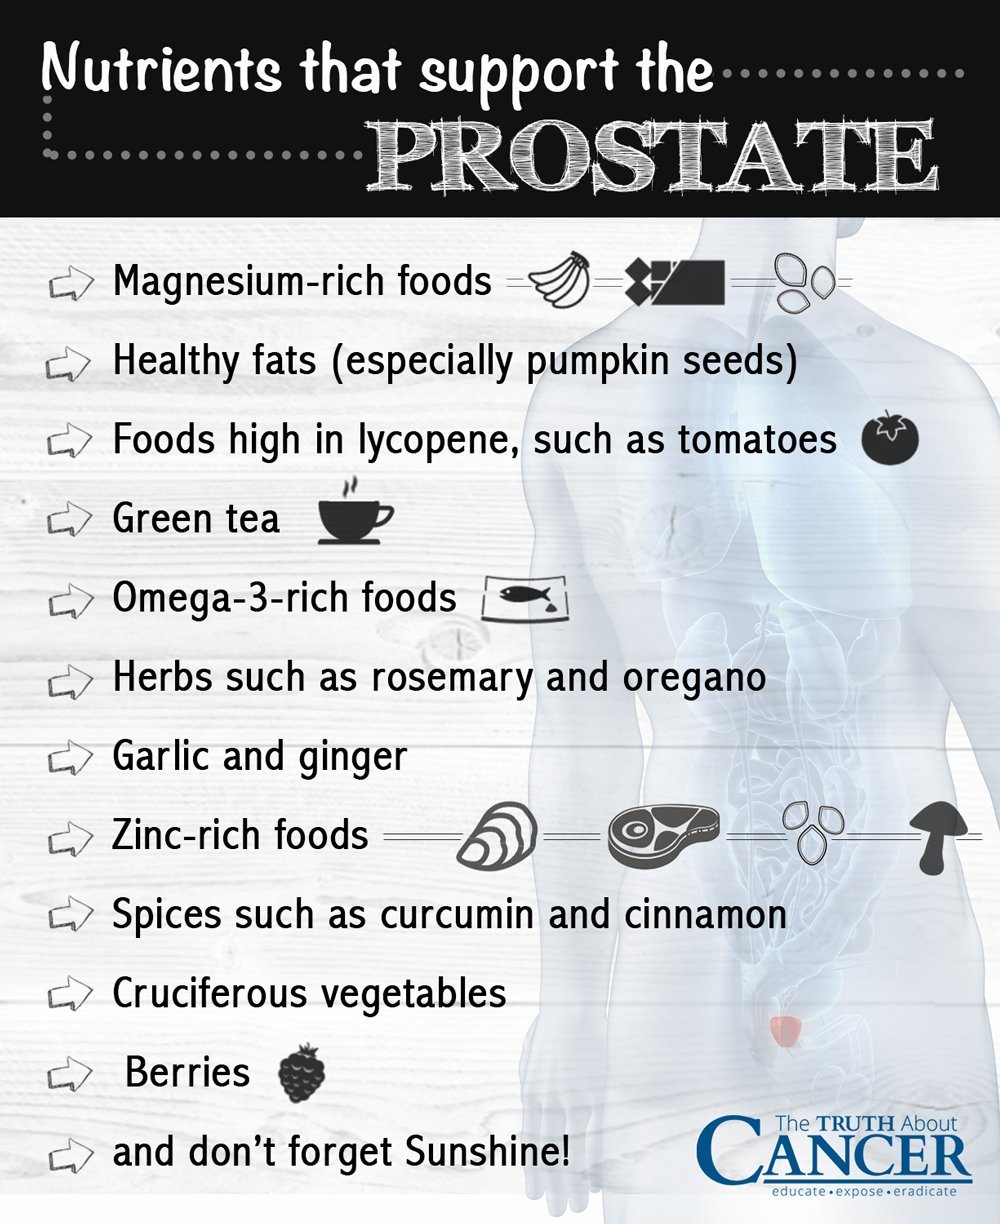 Prostate Cancer Prevention: 12 Ways to Protect Your Prostate